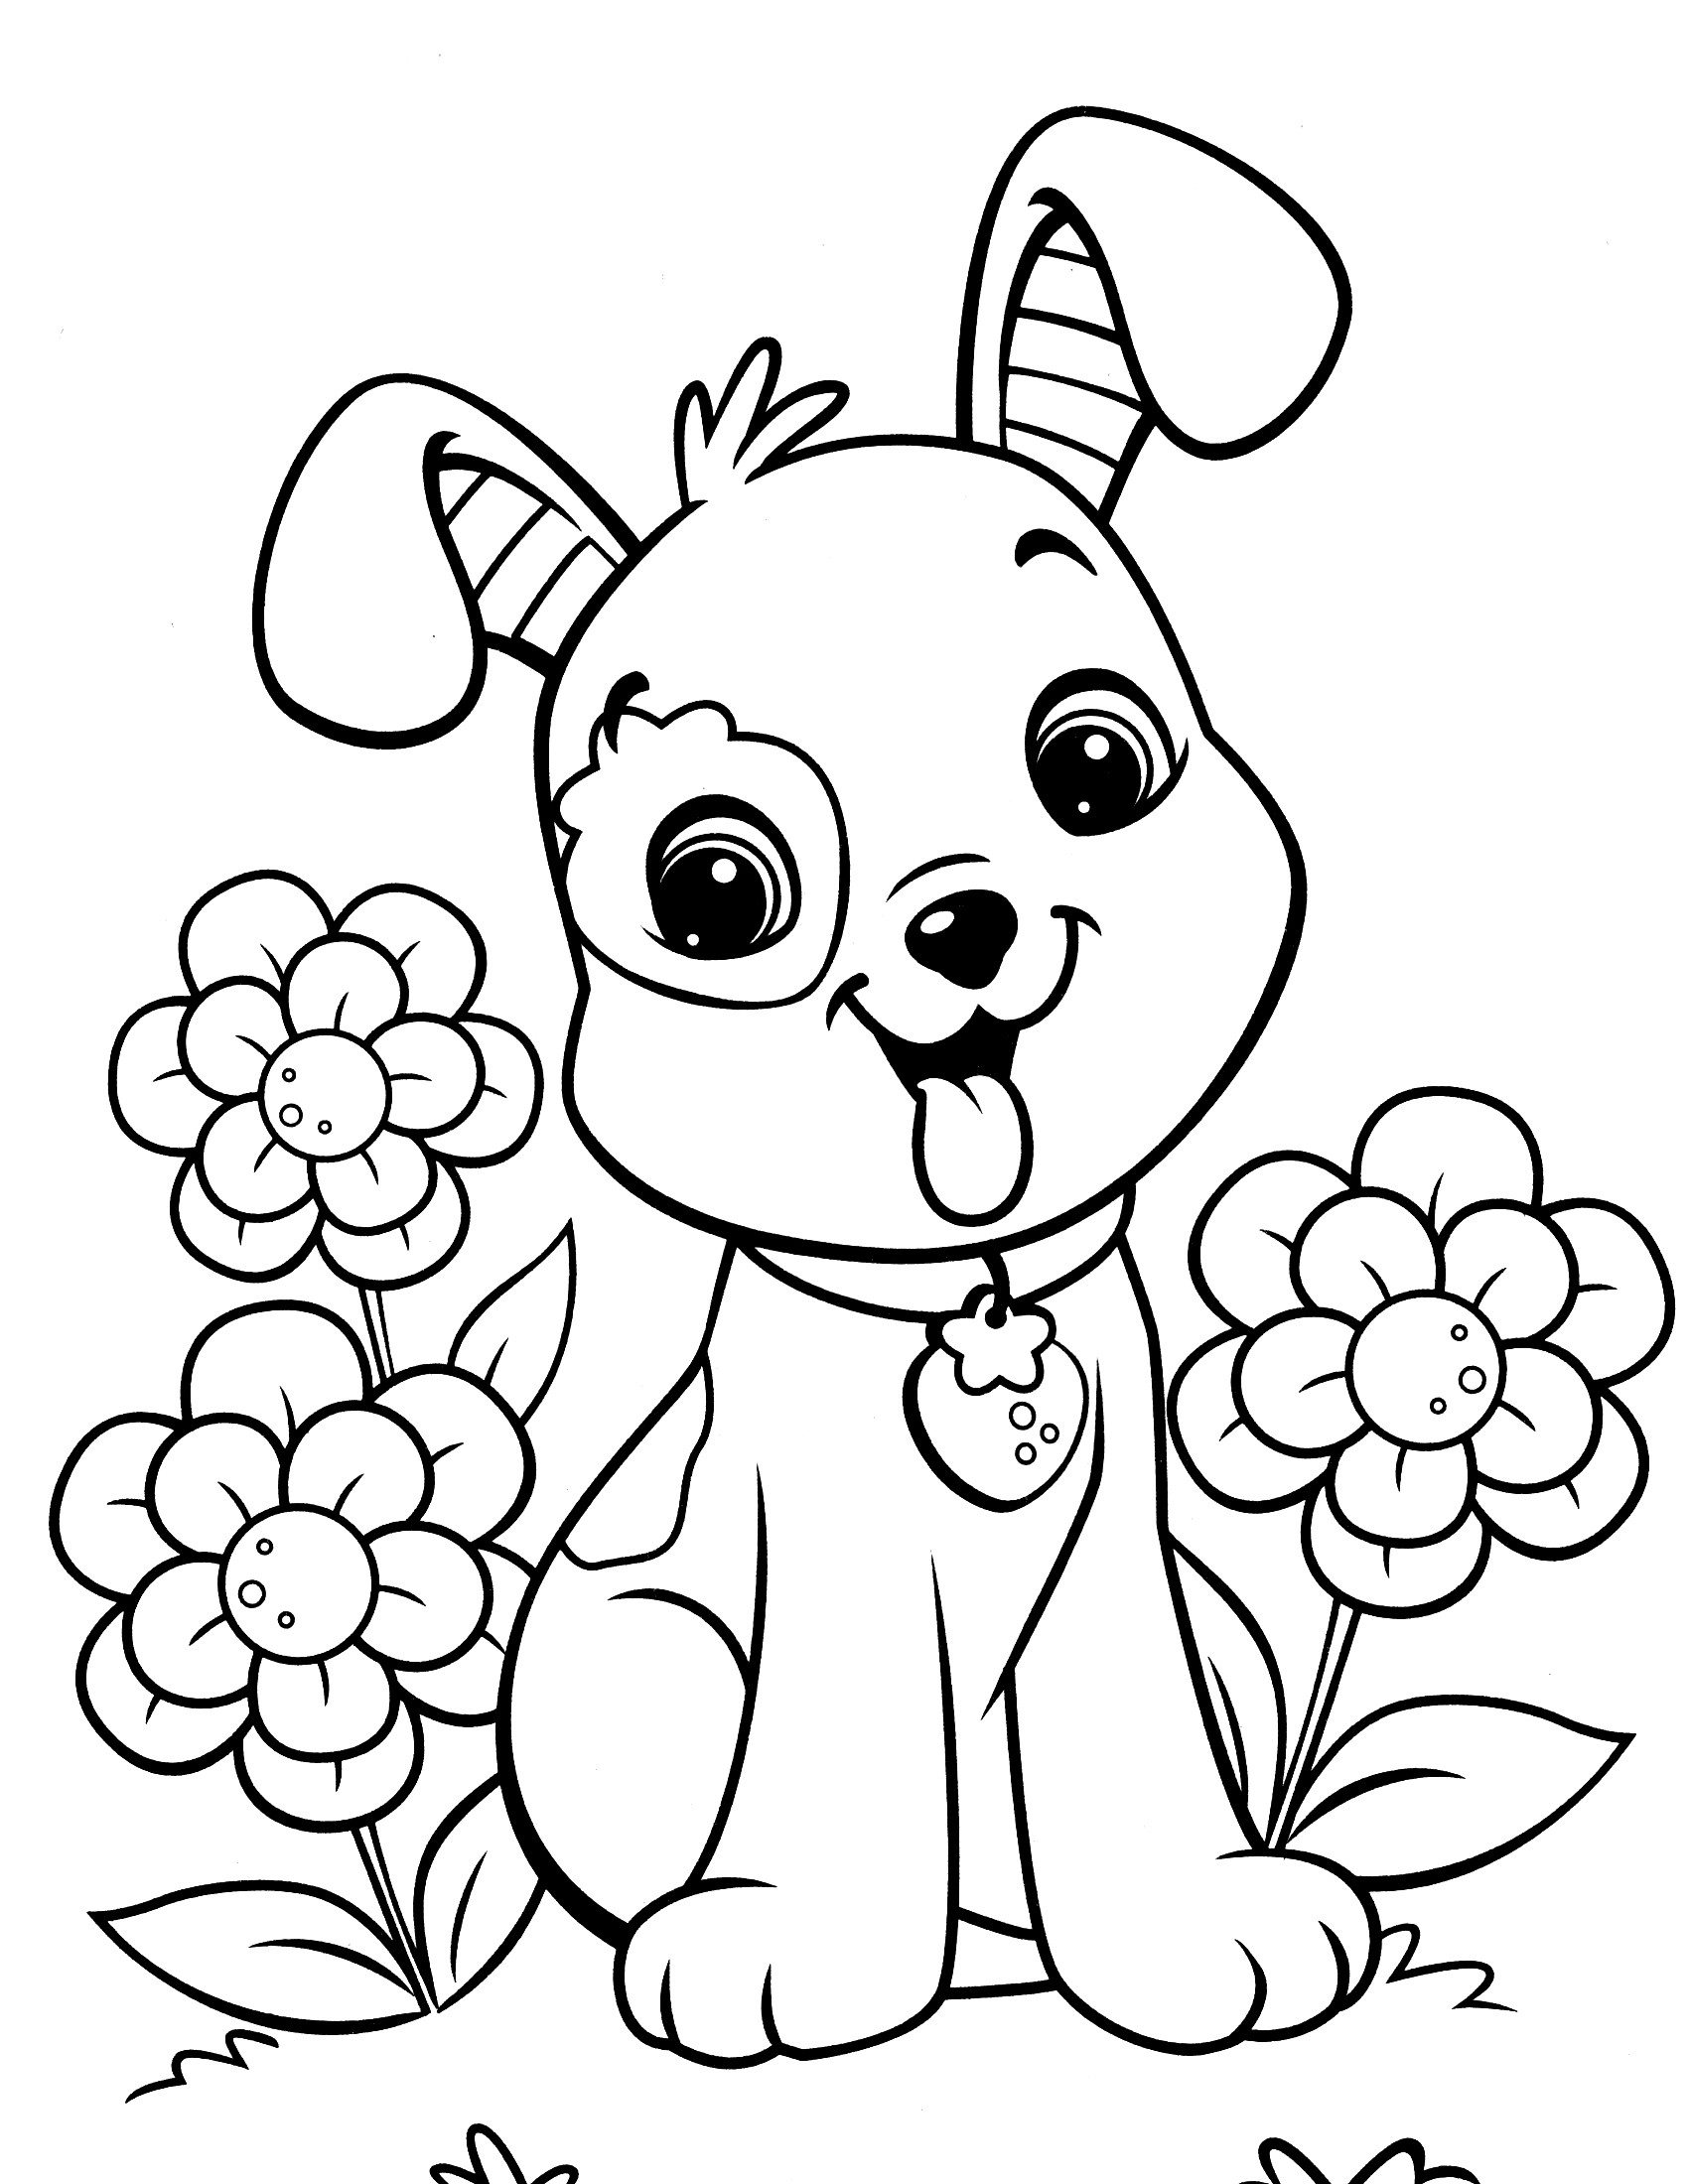 Print Out Coloring Sheets For Girls
 Coloring Pages For Girls To Print Out Dog Pitchers Dogs